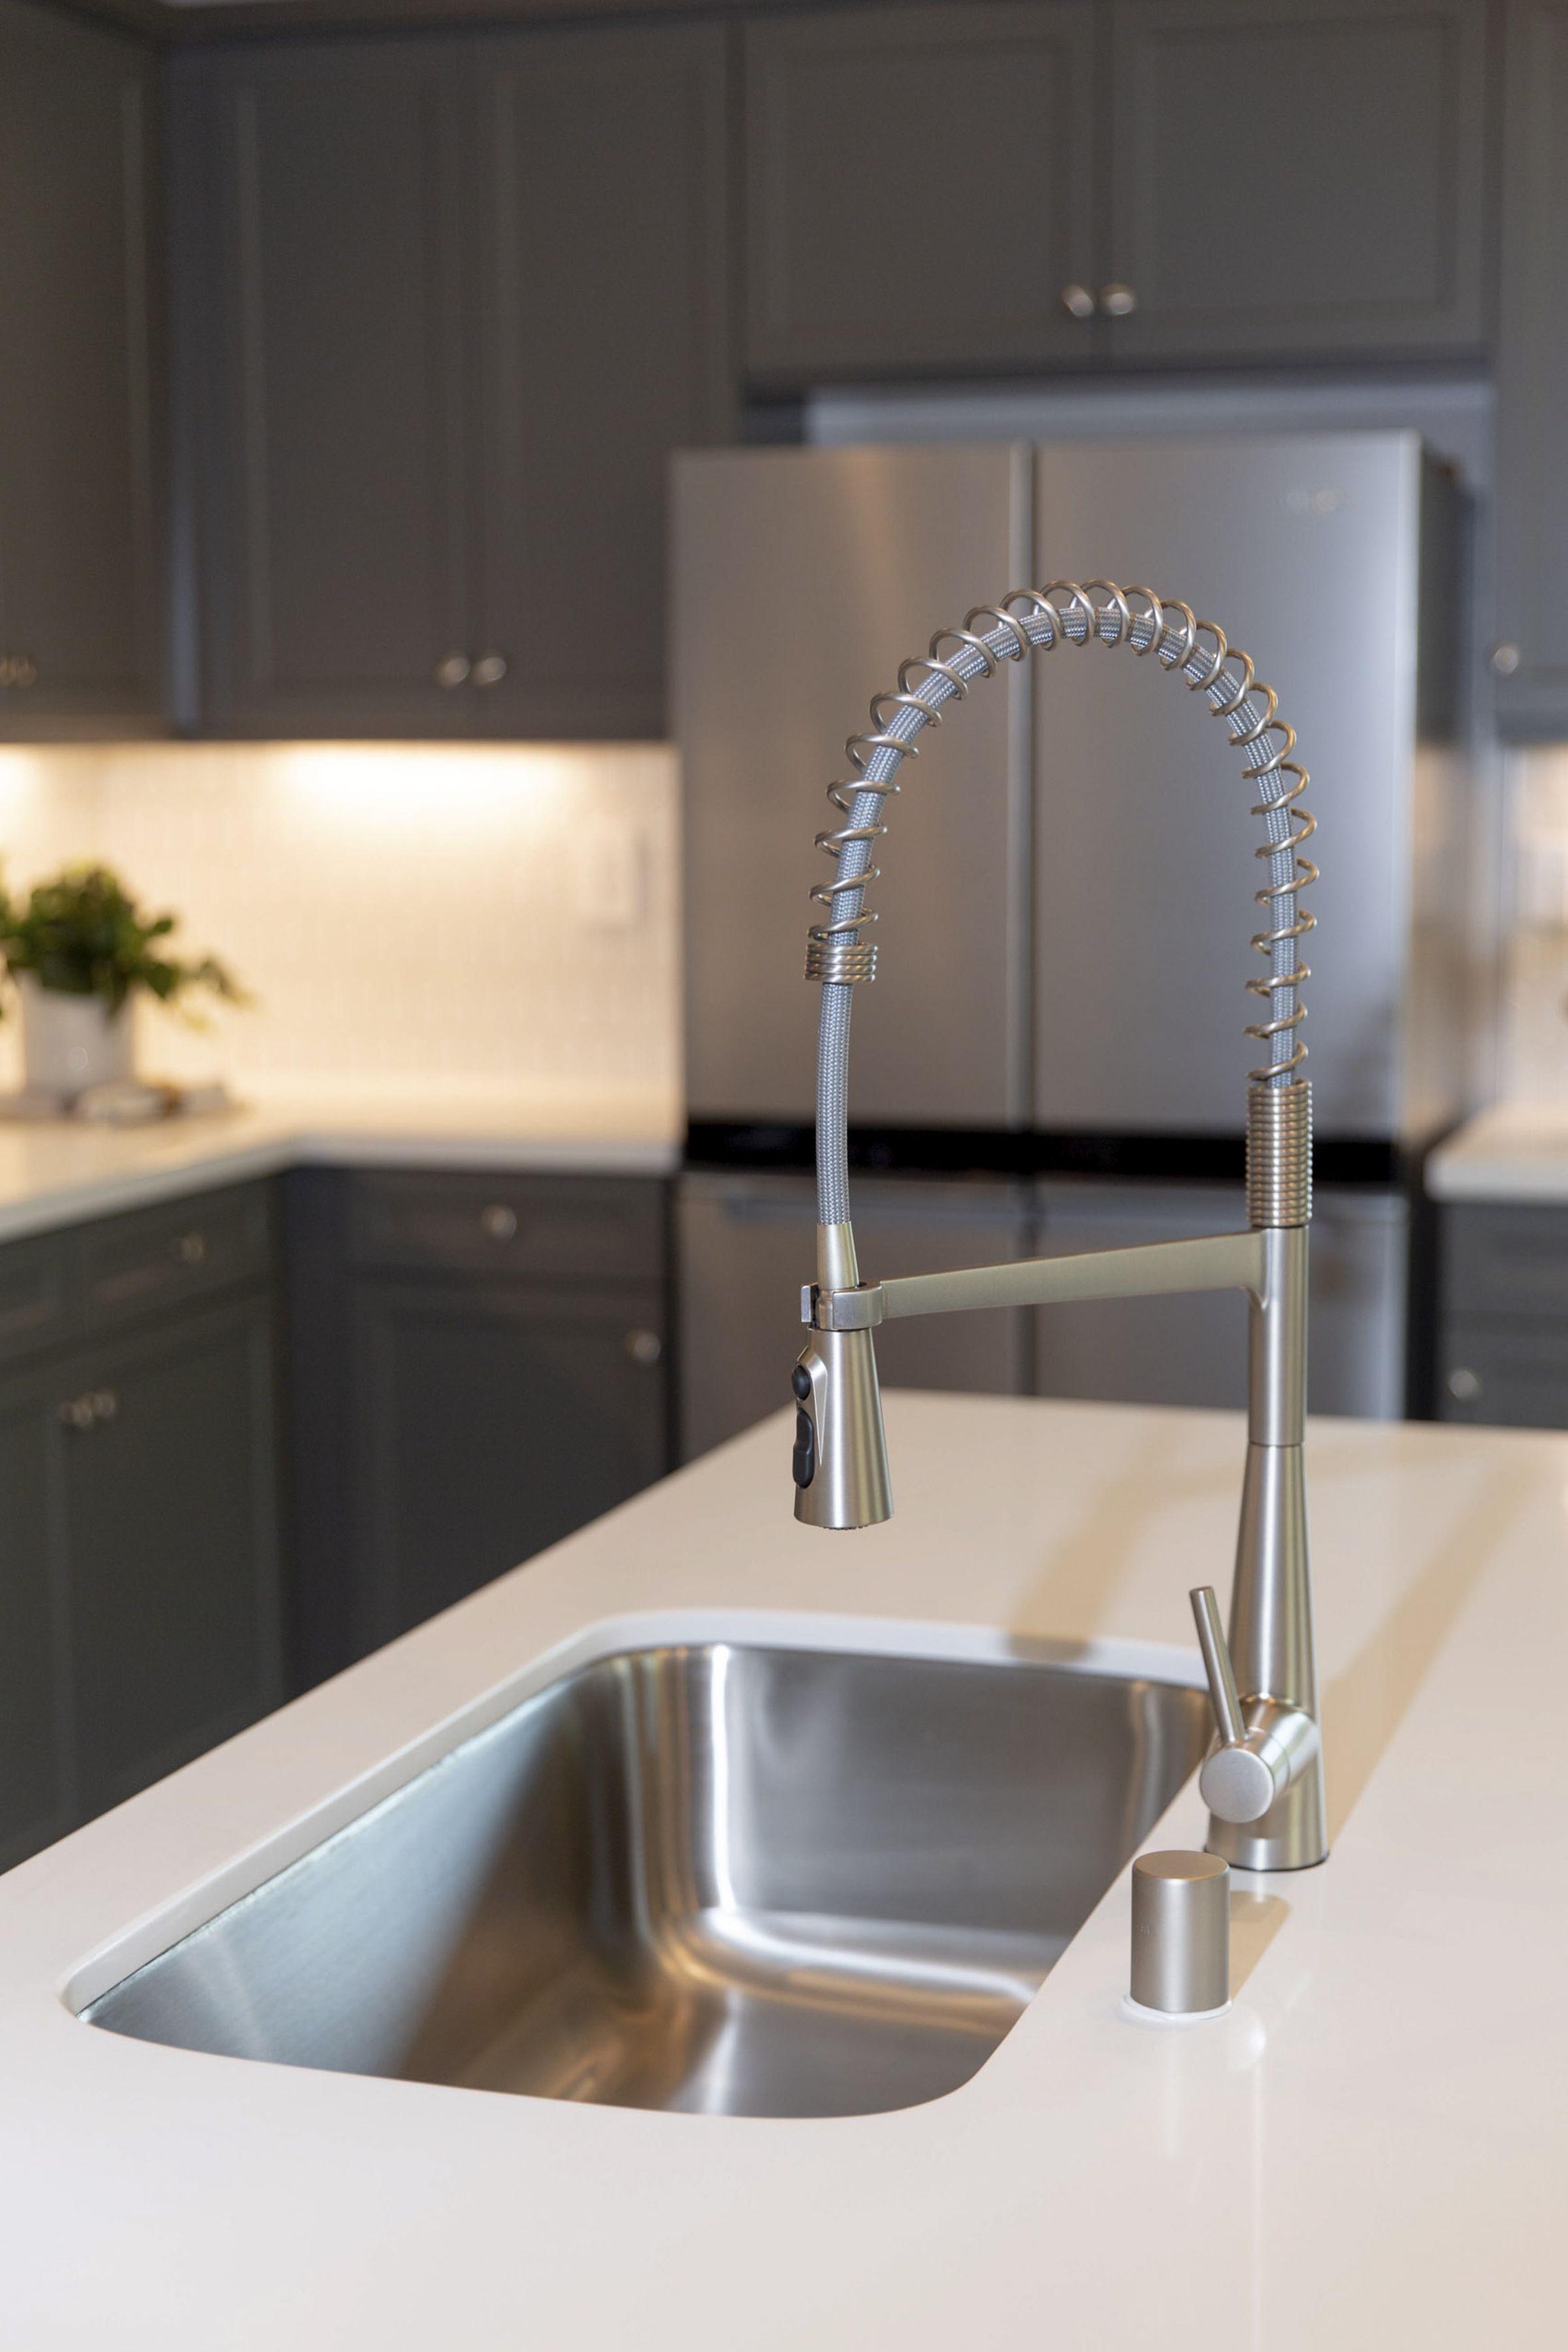 <em>All the homes are </em><a href="https://www.kbhome.com/water-sense"><em>WaterSense labeled</em></a><em> and all have WaterSense faucets and other plumbing fixtures, which use at least 30 percent less water than a typical home.</em>